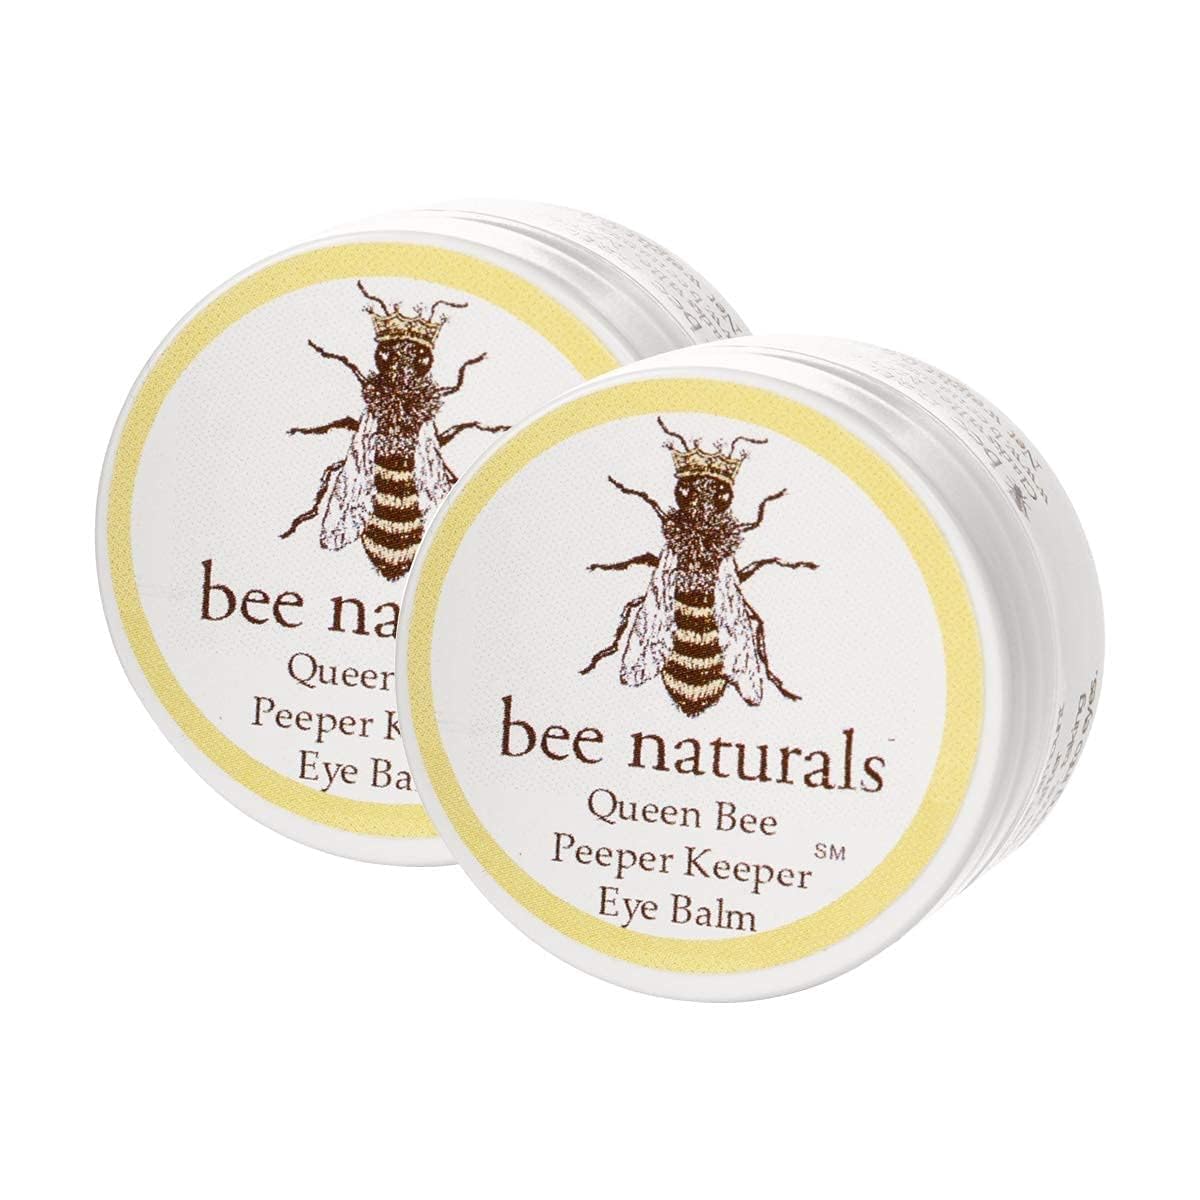 Queen Eye Balm Duo - Peeper Keeper - 2 Pack Gift Set - Soothes & Moisturizes with Vitamin E & 10 Natural Oils - Helps Diminish Crowsfeet, Wrinkles & Fine Lines